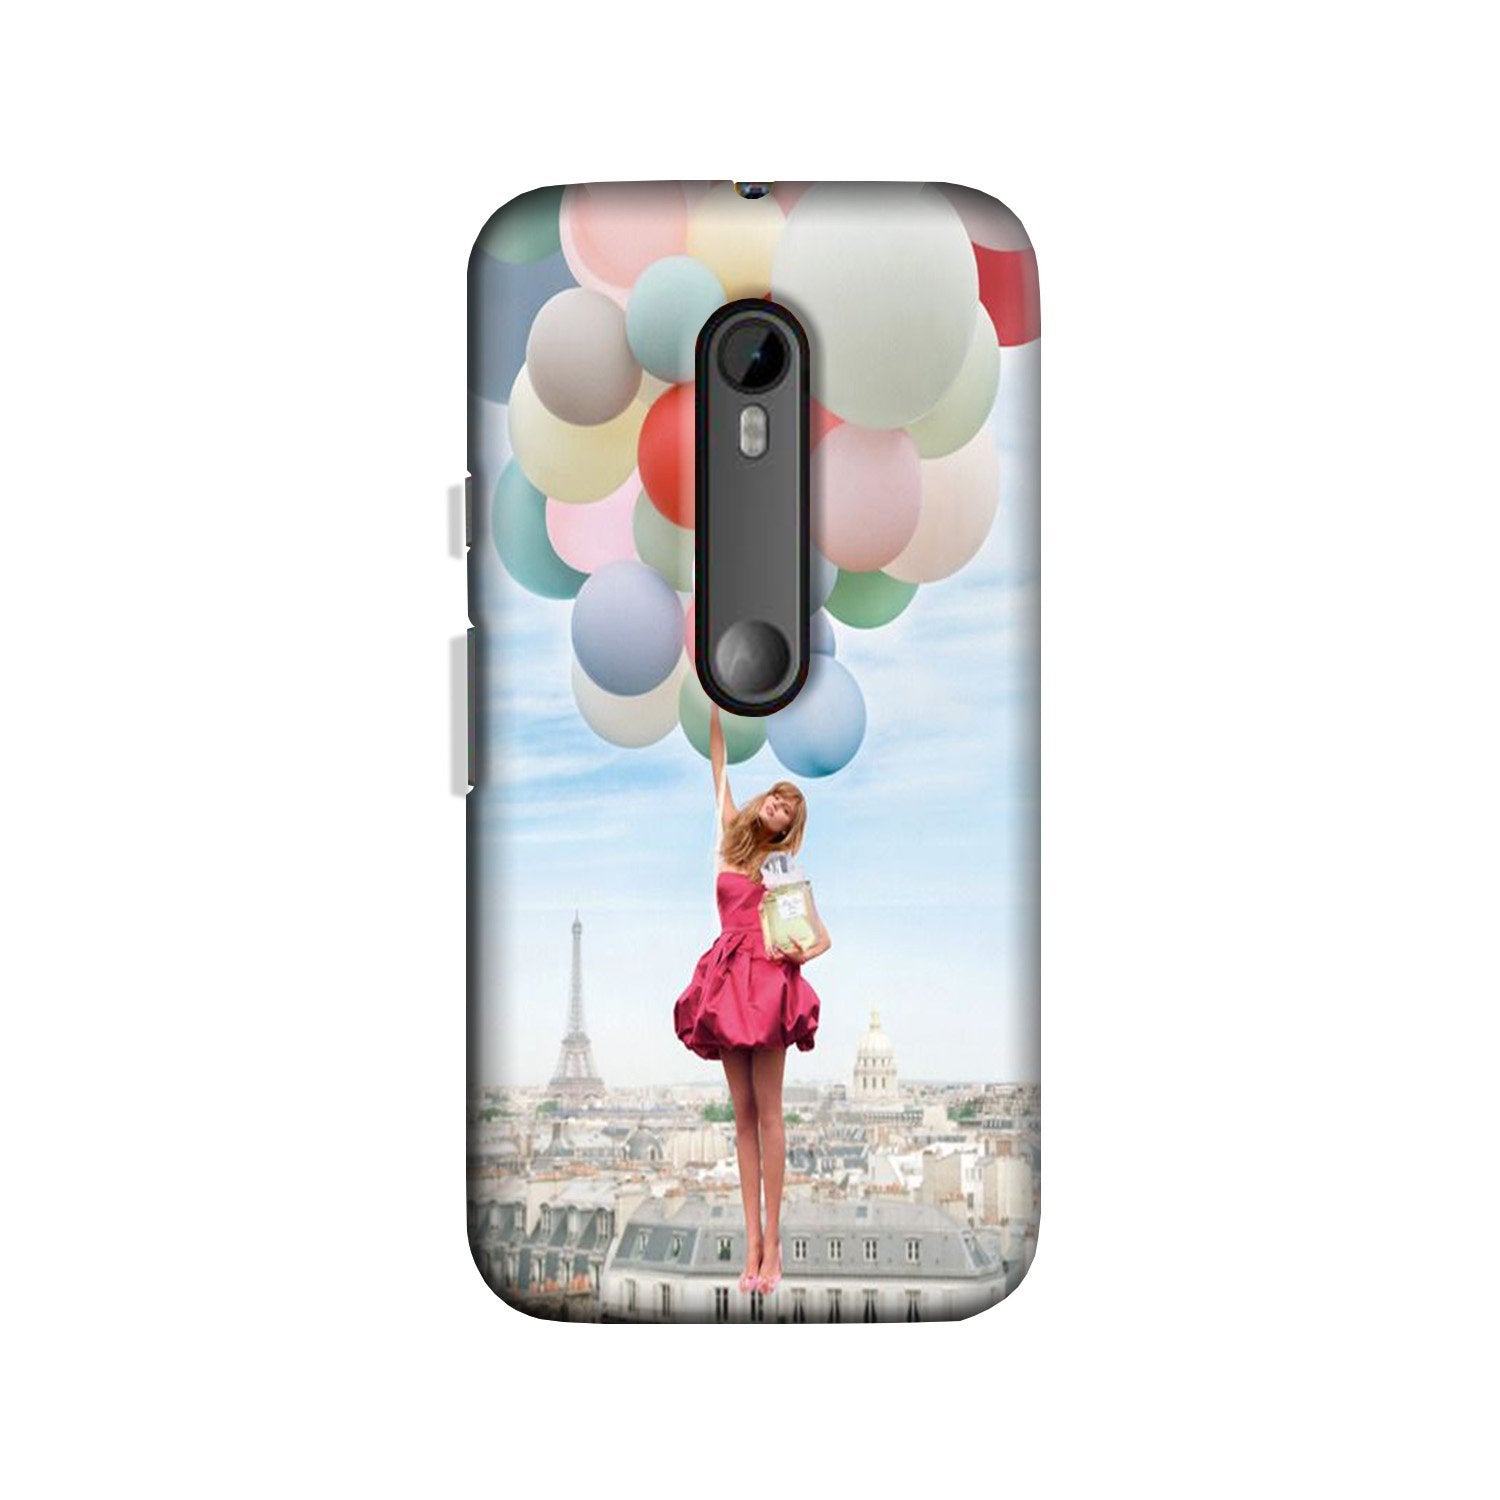 Girl with Baloon Case for Moto G 3rd Gen